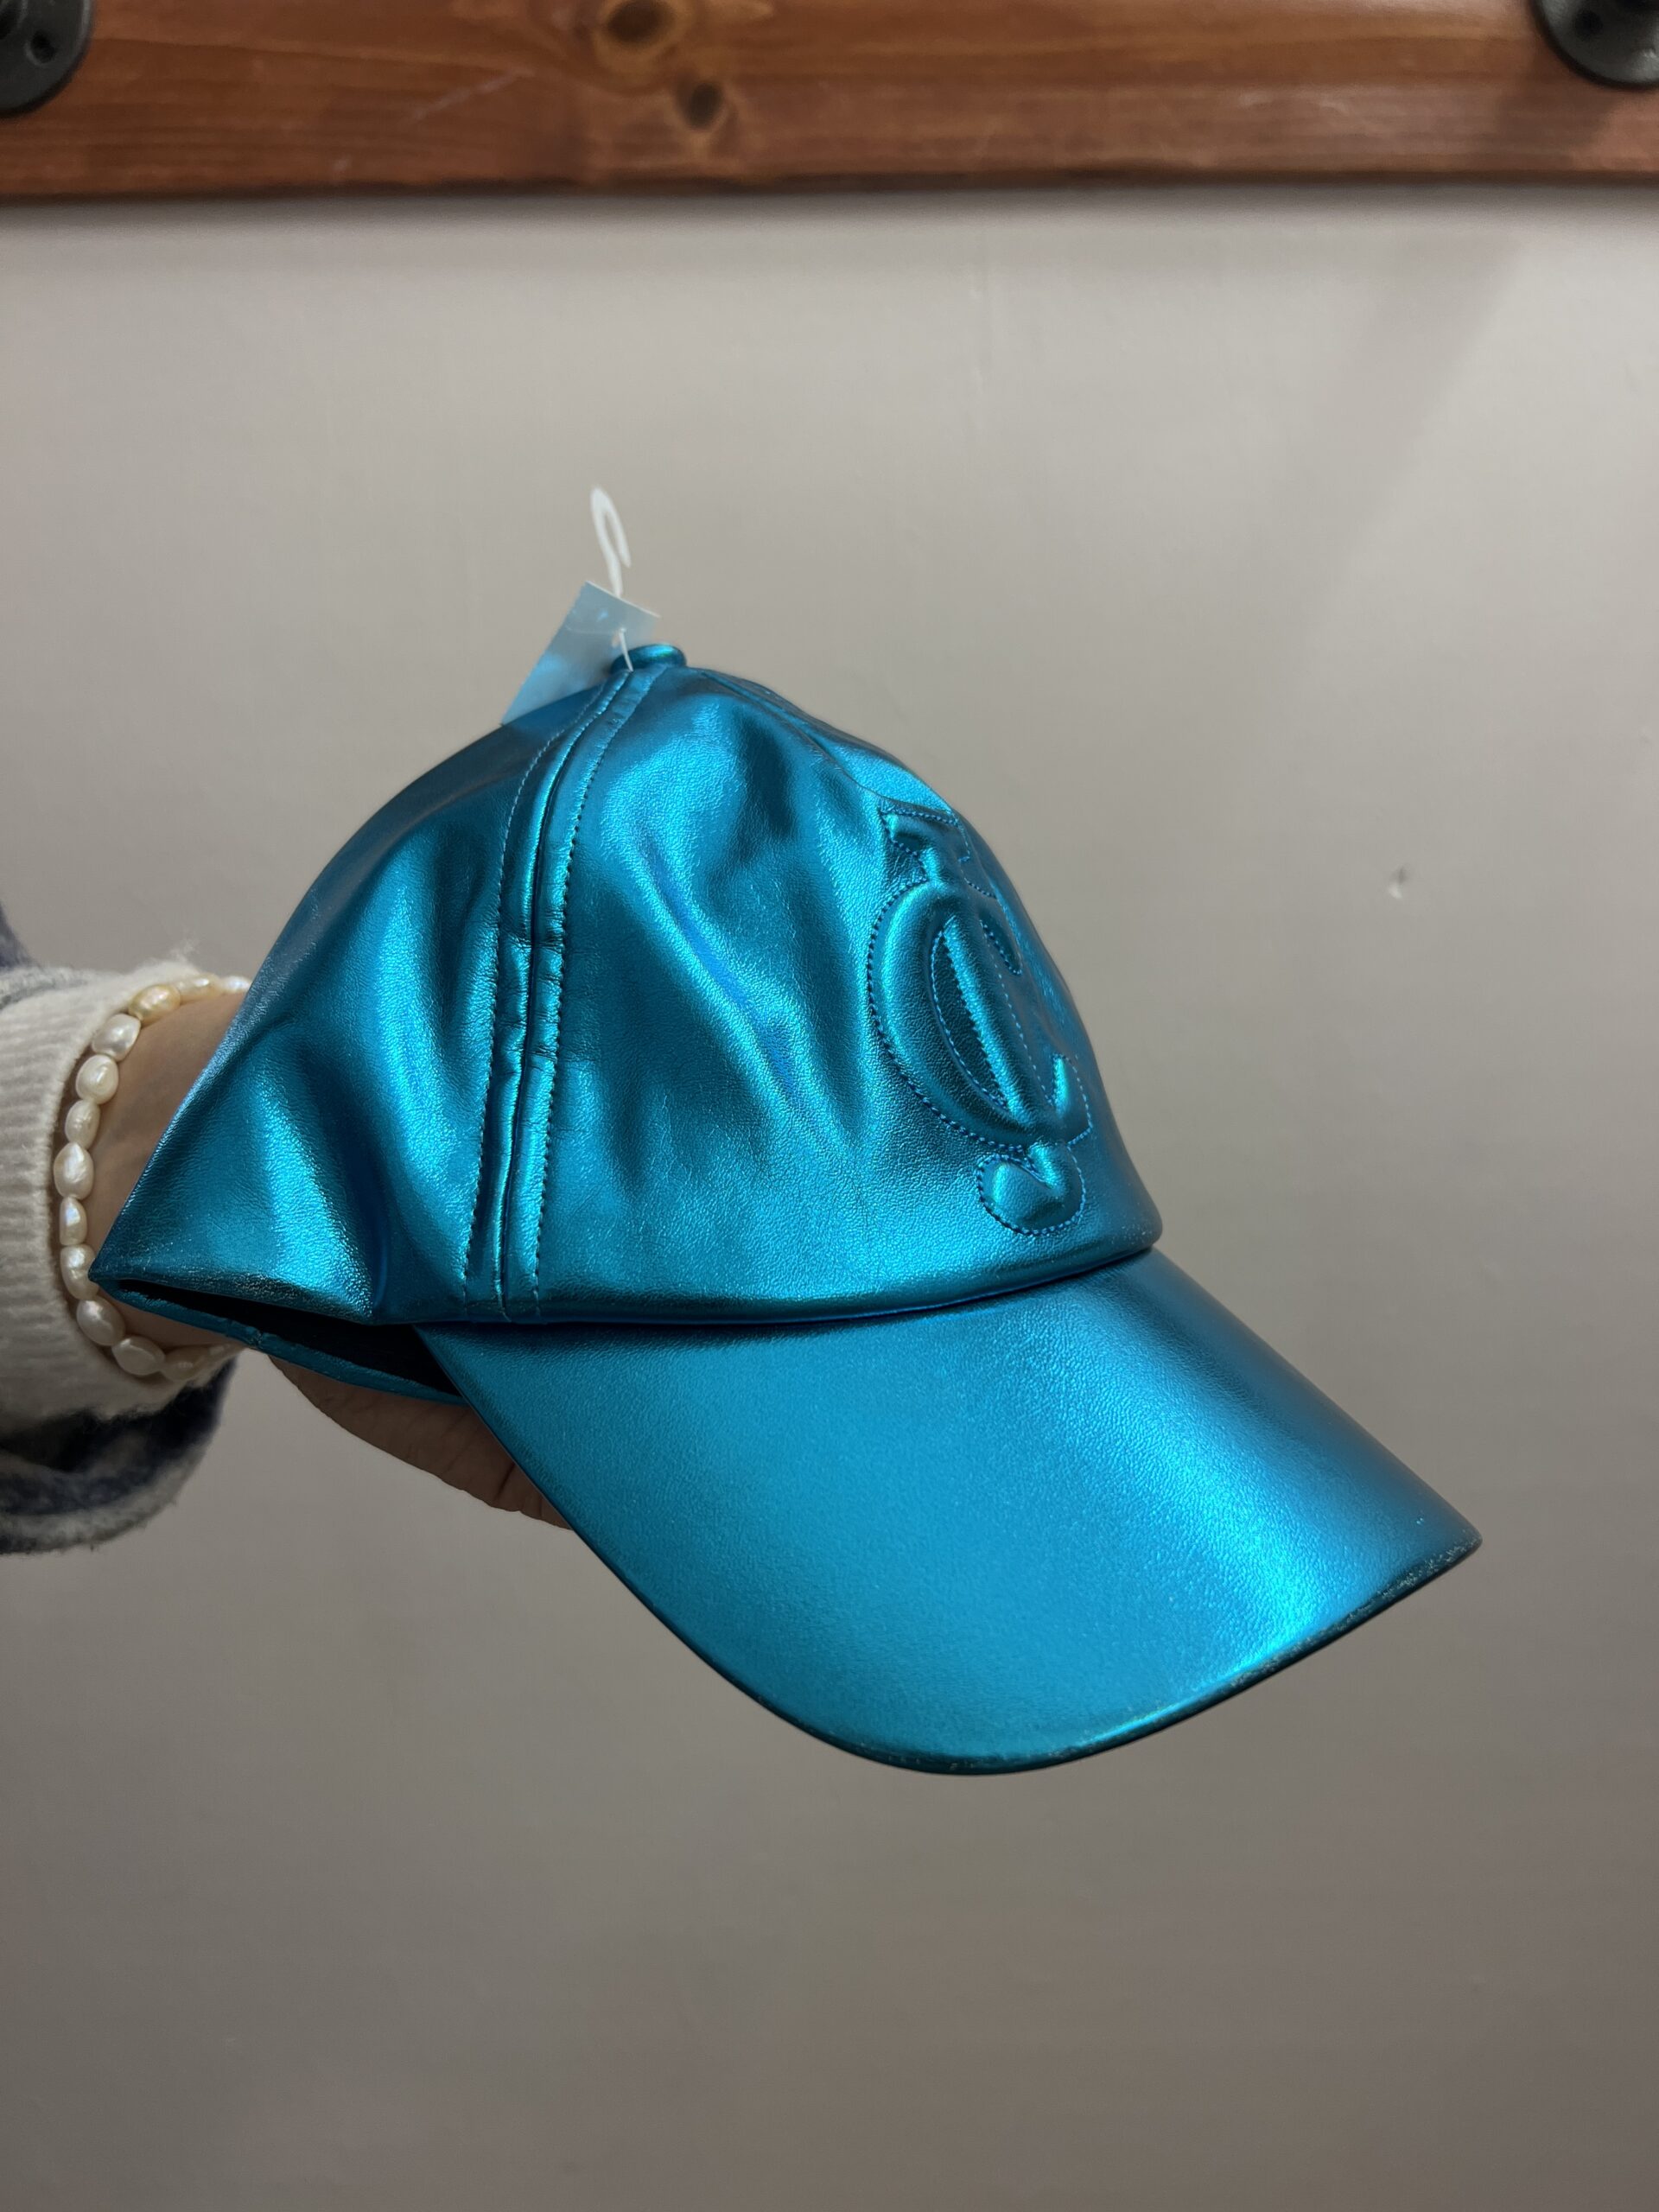 close up of a hand holding a Juicy Couture metallic blue baseball cap